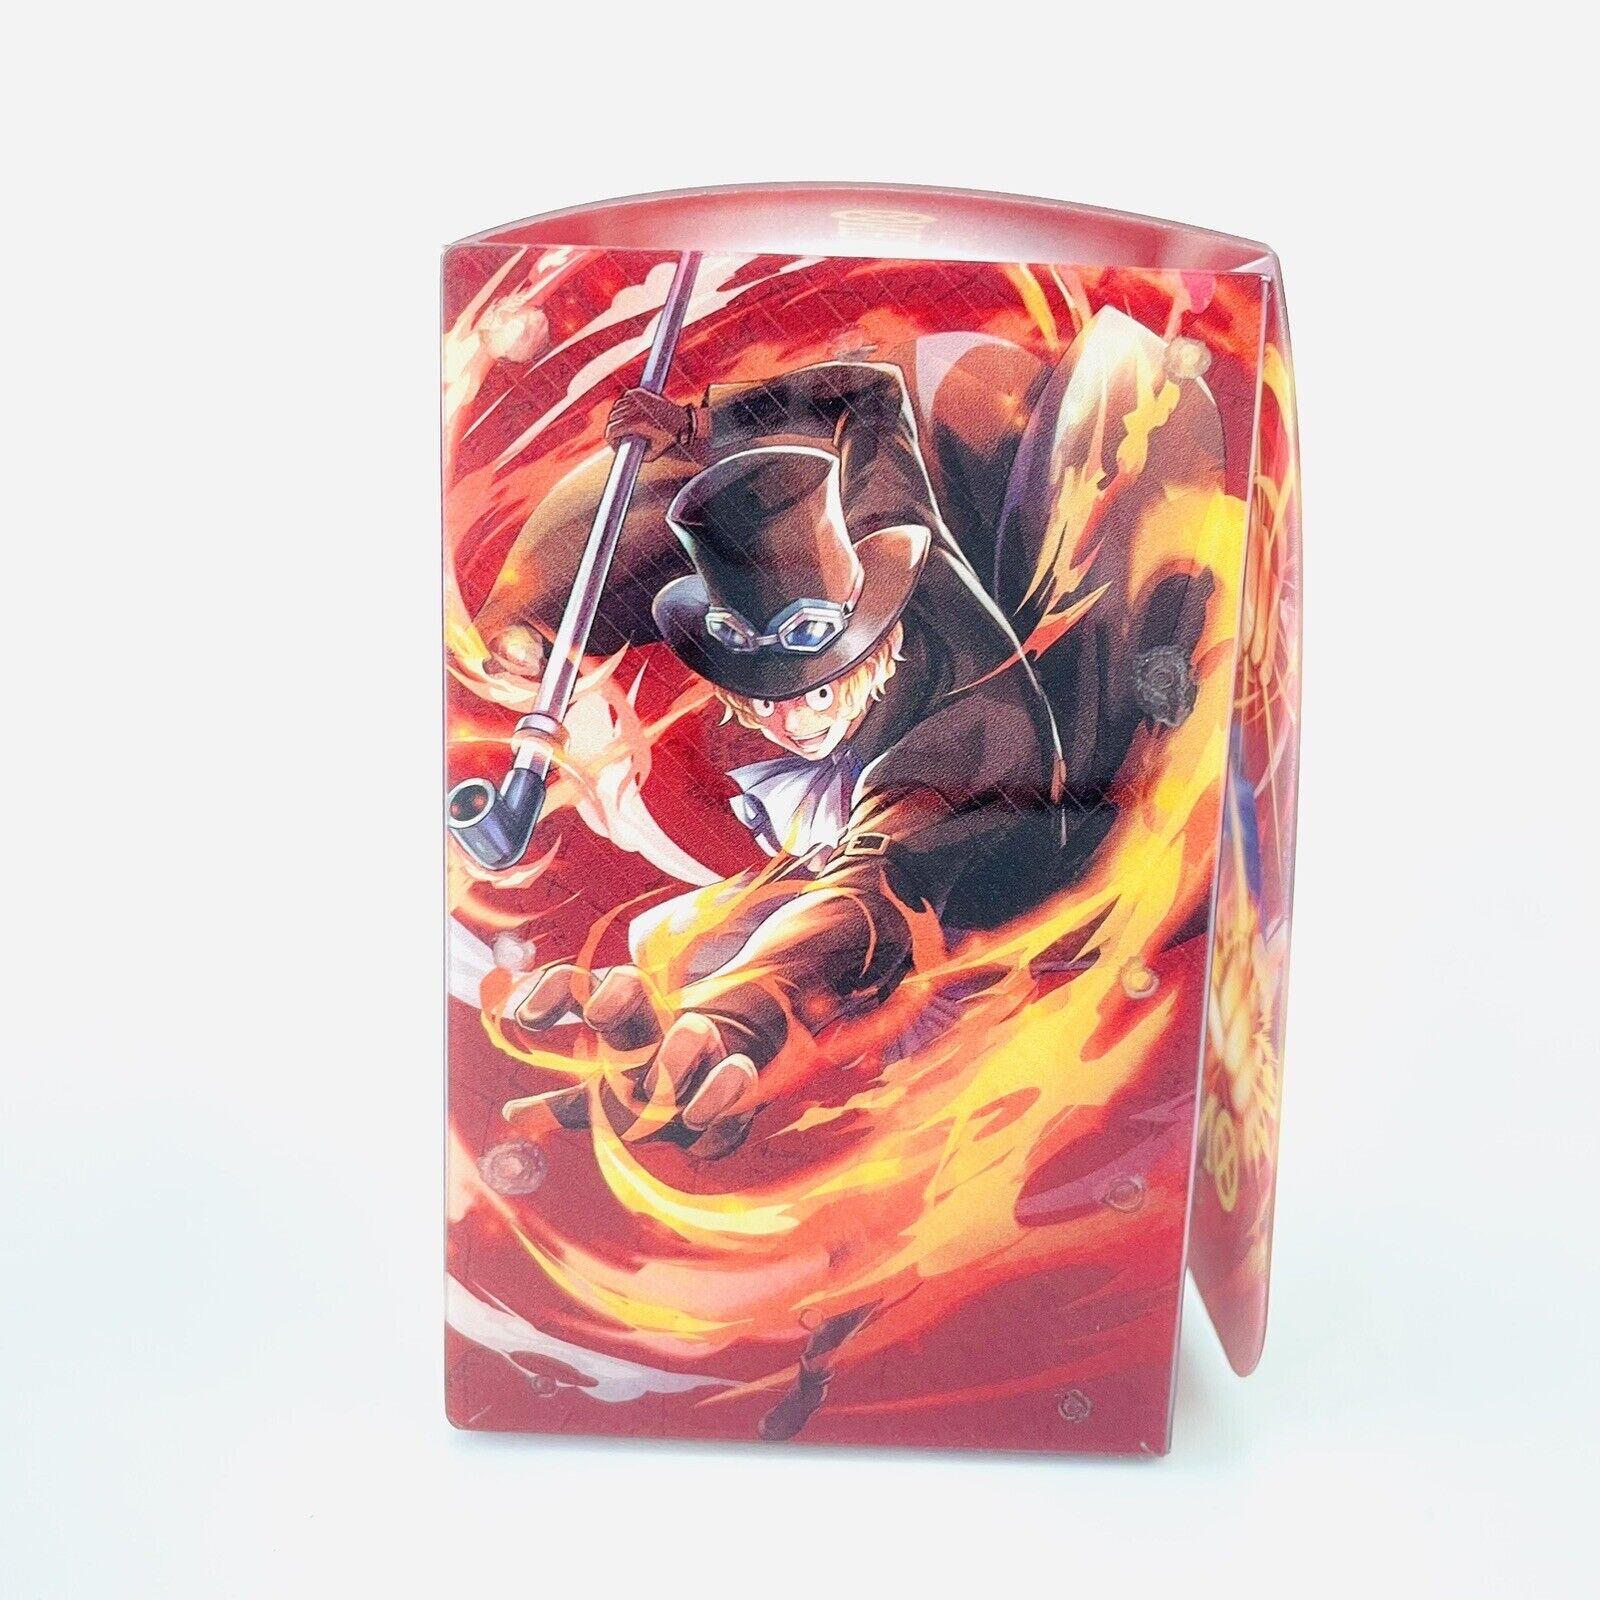 ONE PIECE CARD GAME OFFICIAL CARD CASE  - THE THREE BROTHERS' BOND